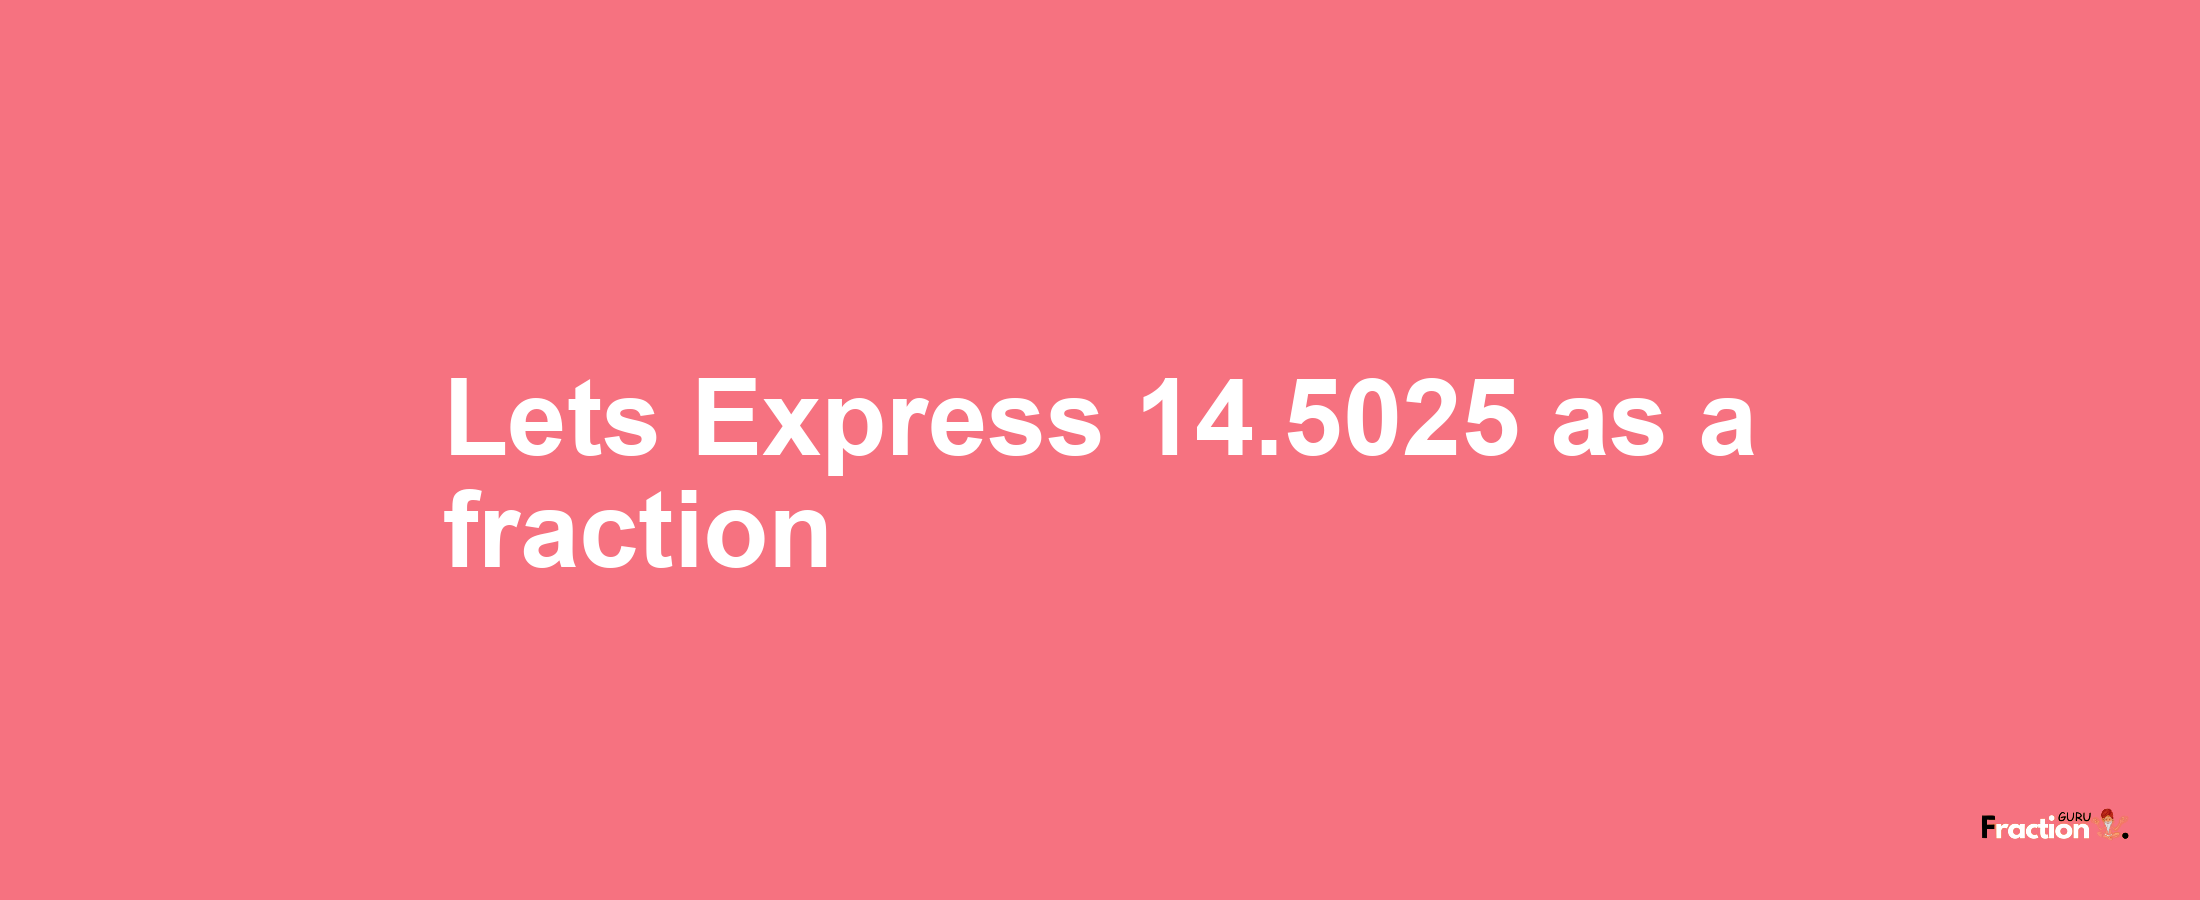 Lets Express 14.5025 as afraction